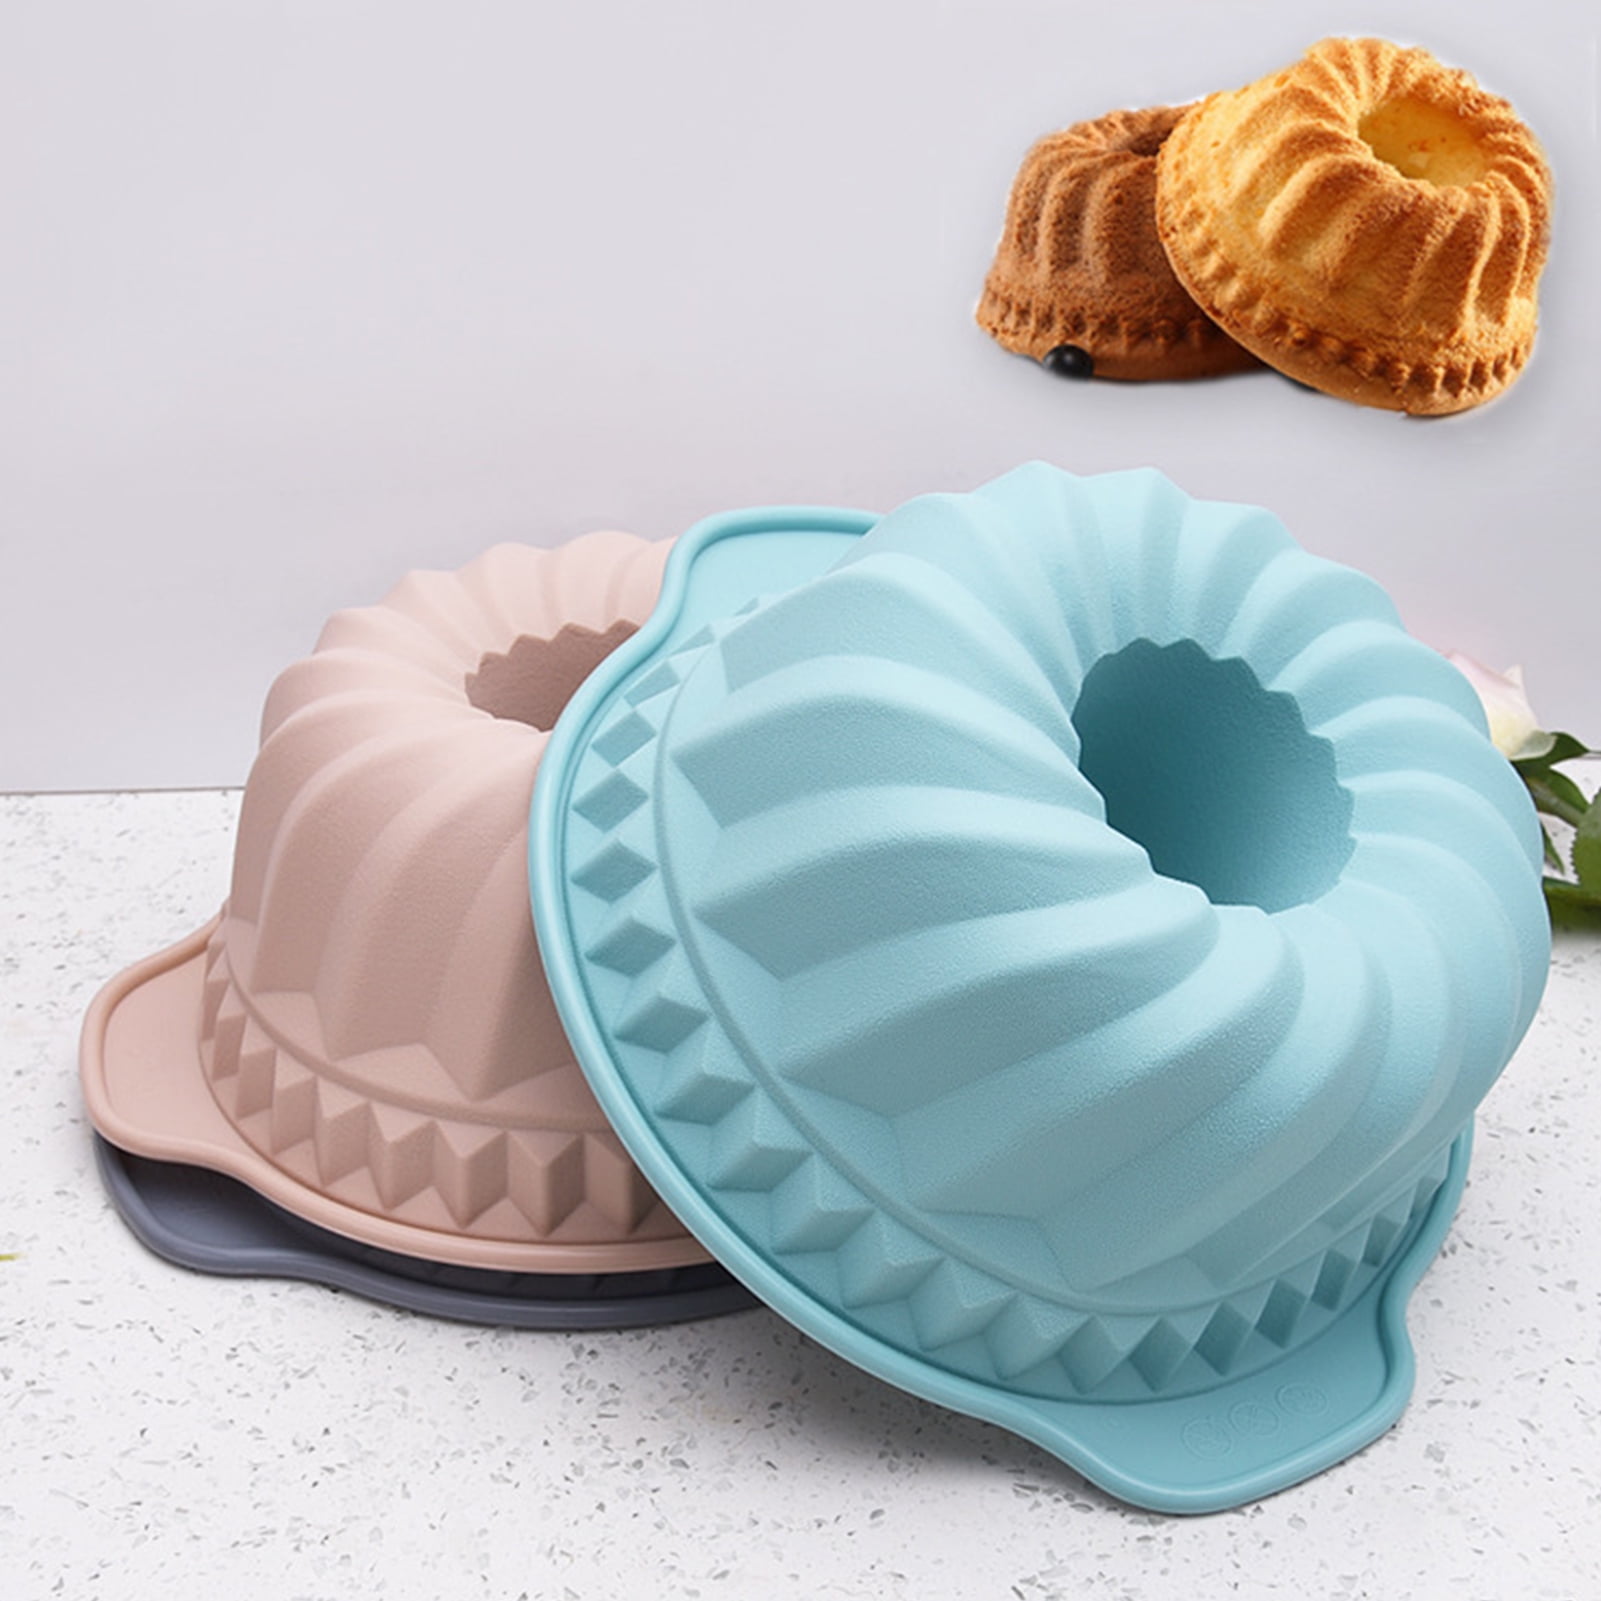 Details about   Large Doughnut Mold Plastic Hollow Bread Mold Kitchen Household Baking Tools 